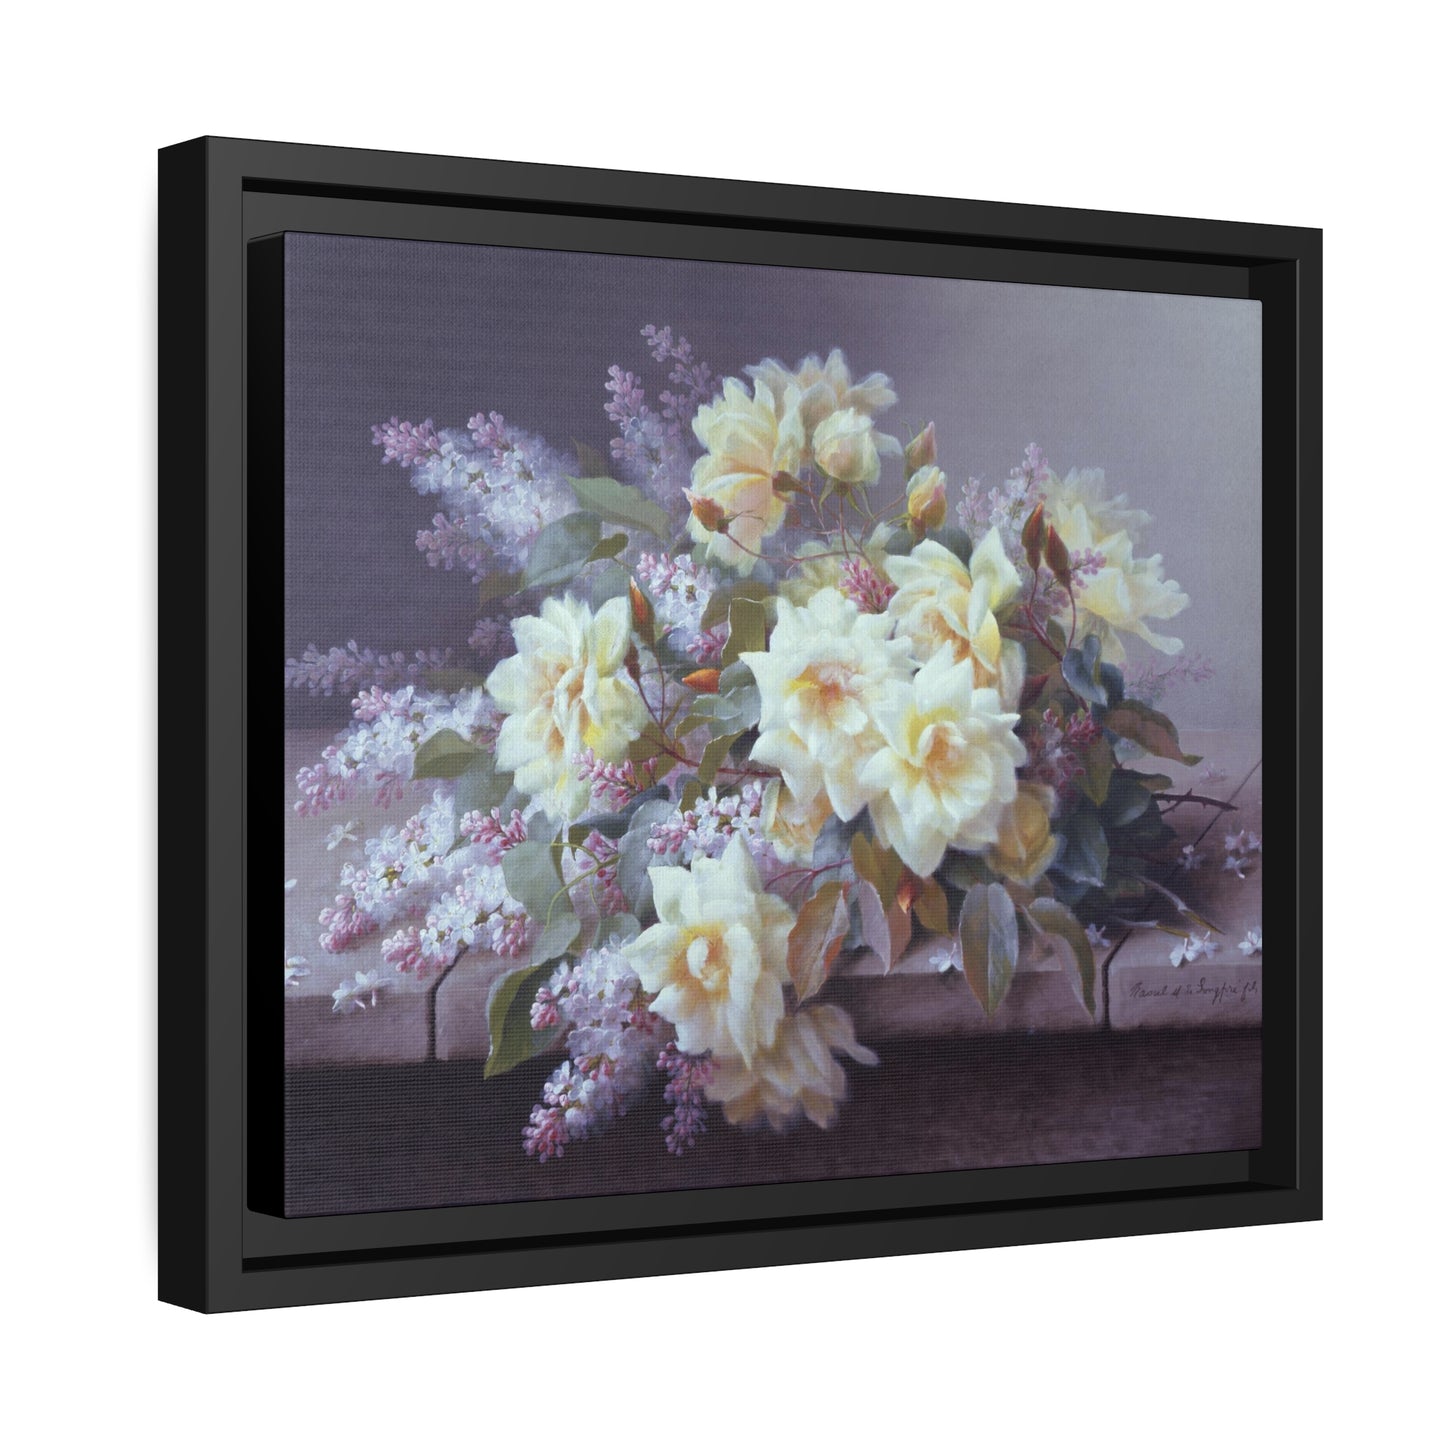 Raoul de Longpre: "Roses and Lilacs on a Stone Ledge" - Framed Canvas Reproduction